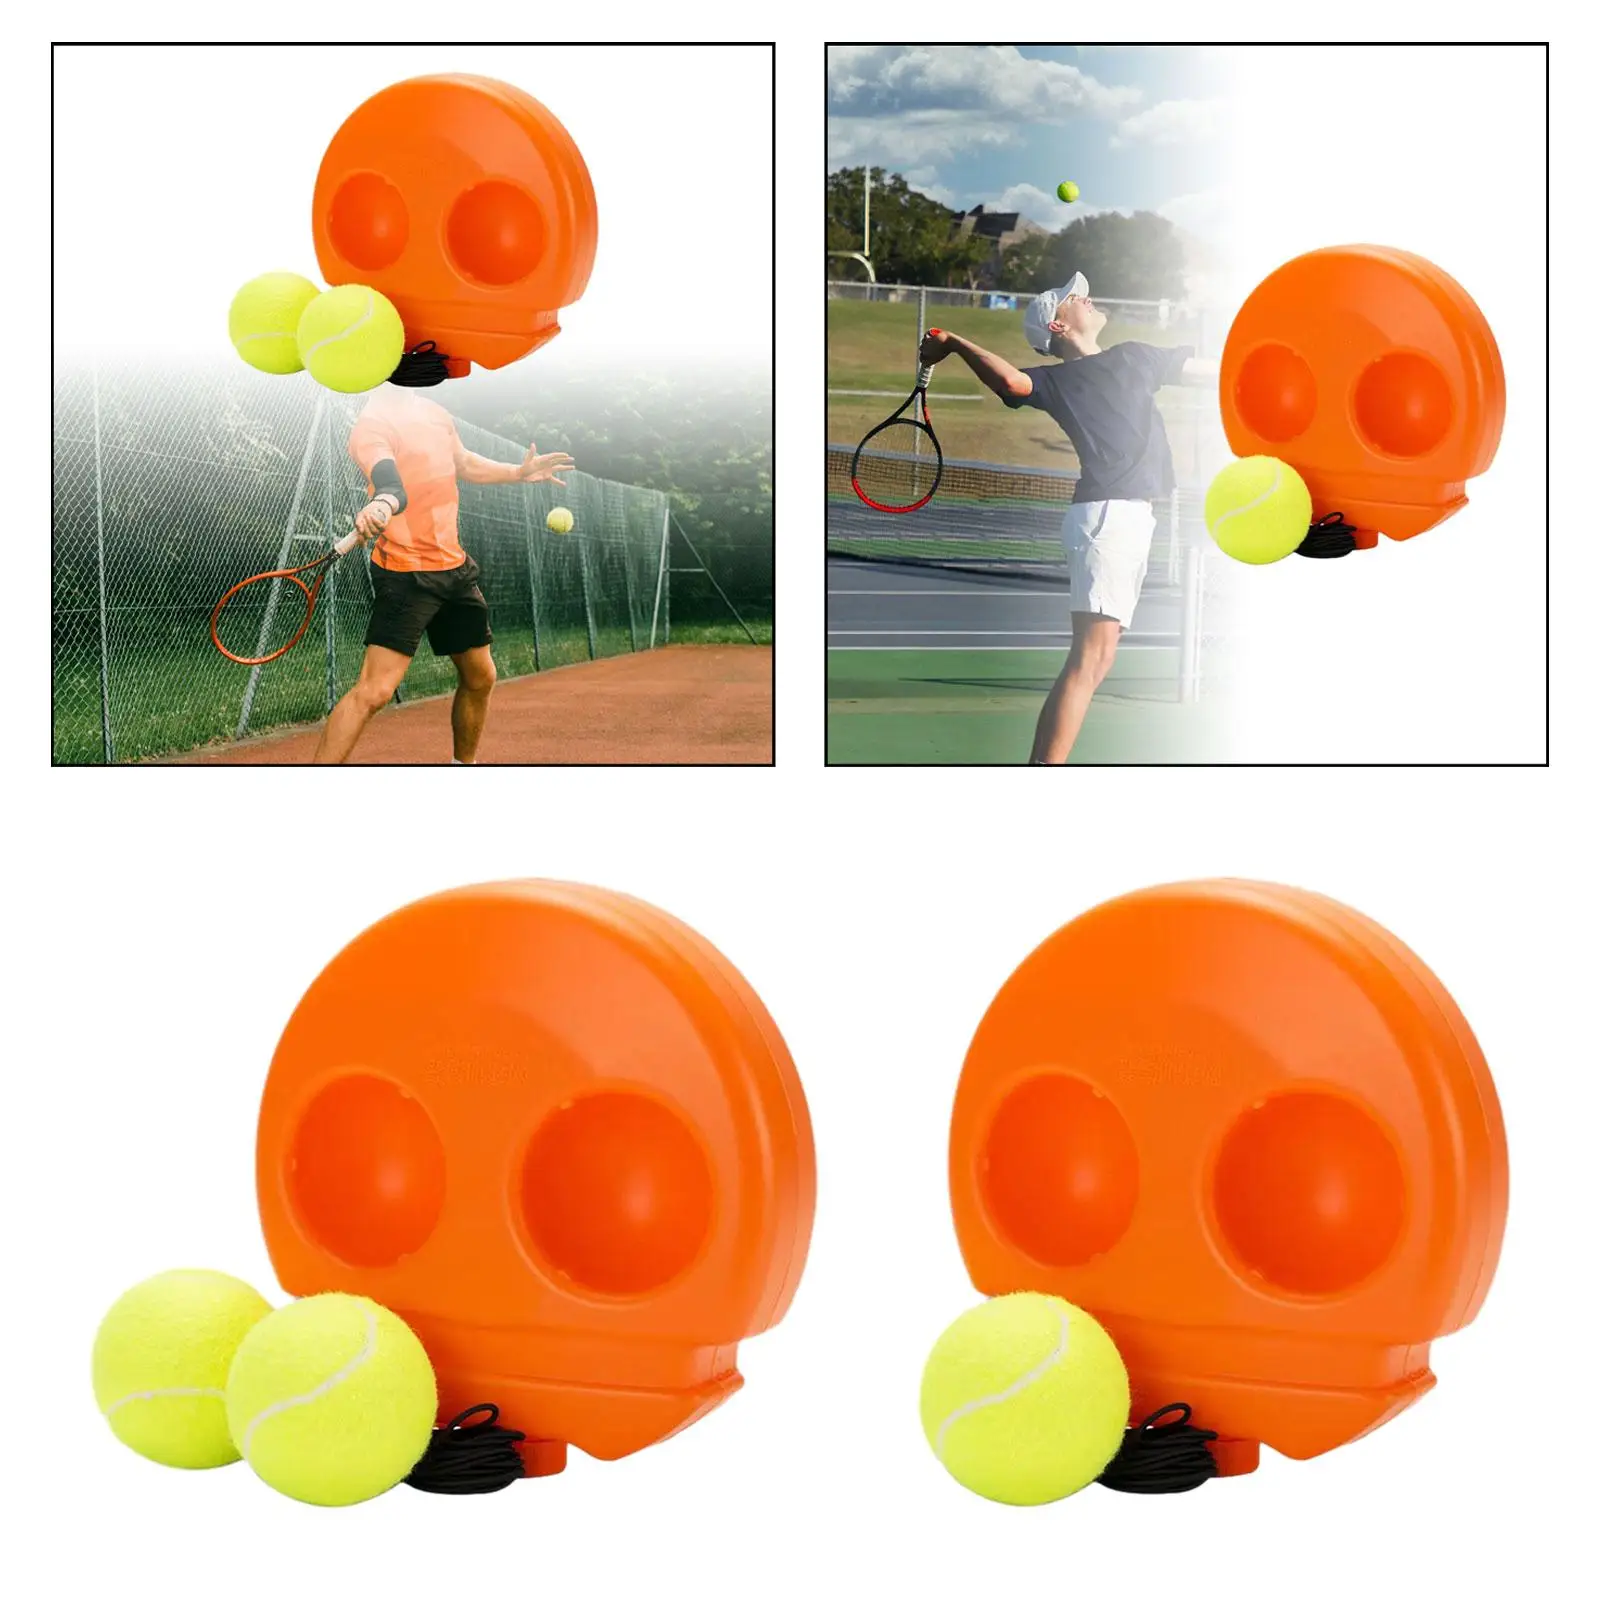 Tennis Trainer Rebound Ball Solo Tennis Trainer for Single Playing, Tennis Practice Rebounder Tennis Training Gear for Indoor